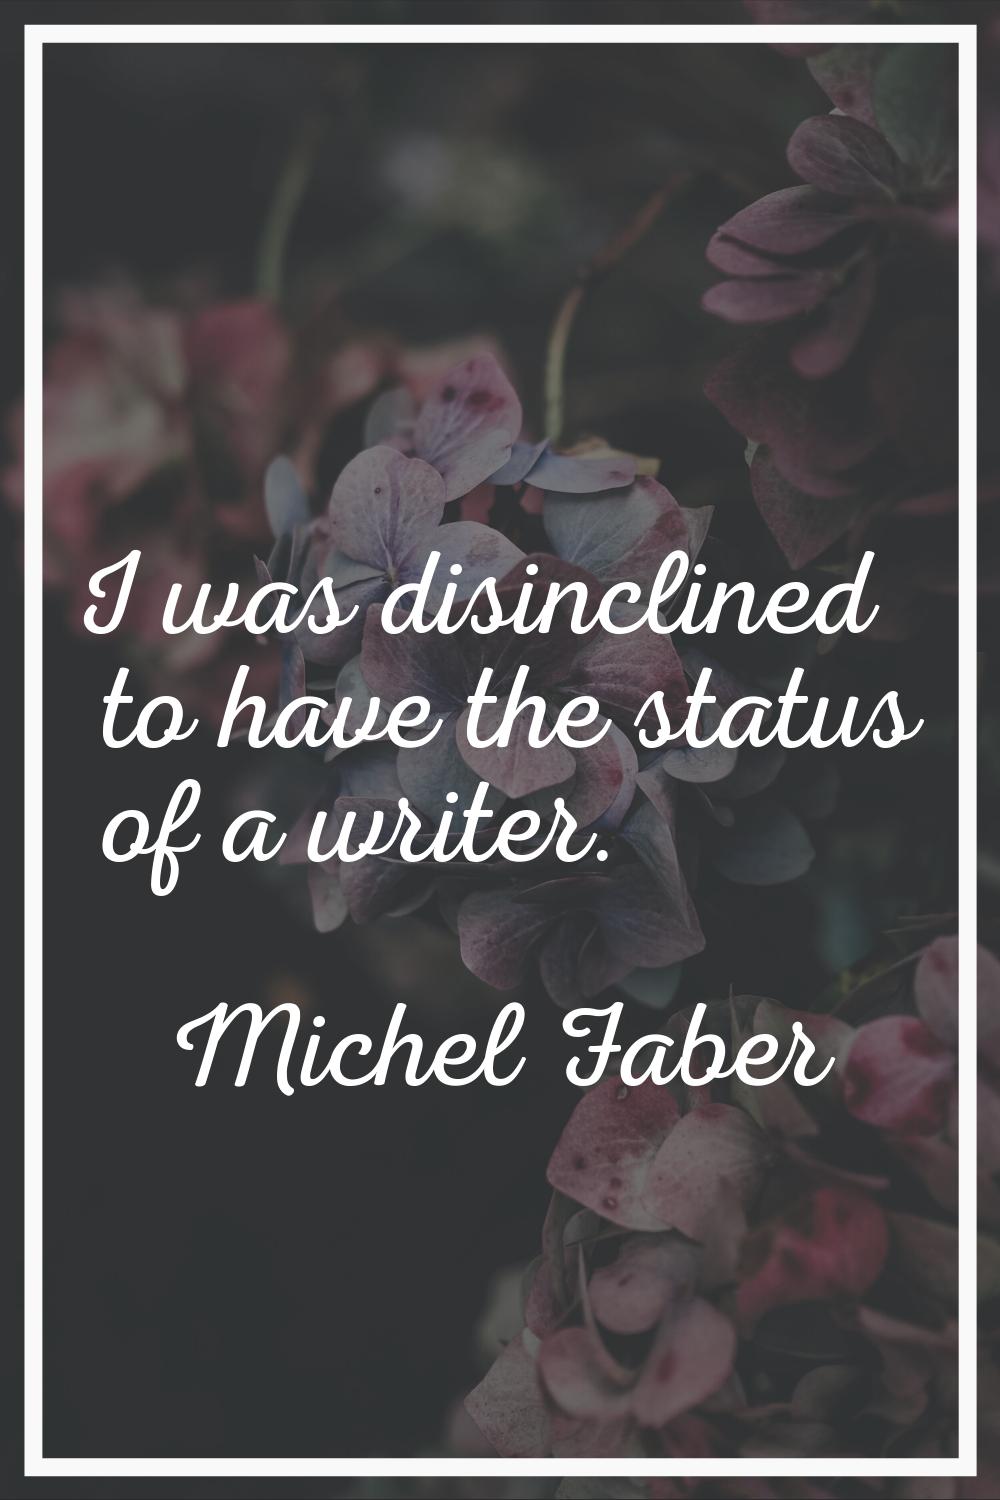 I was disinclined to have the status of a writer.